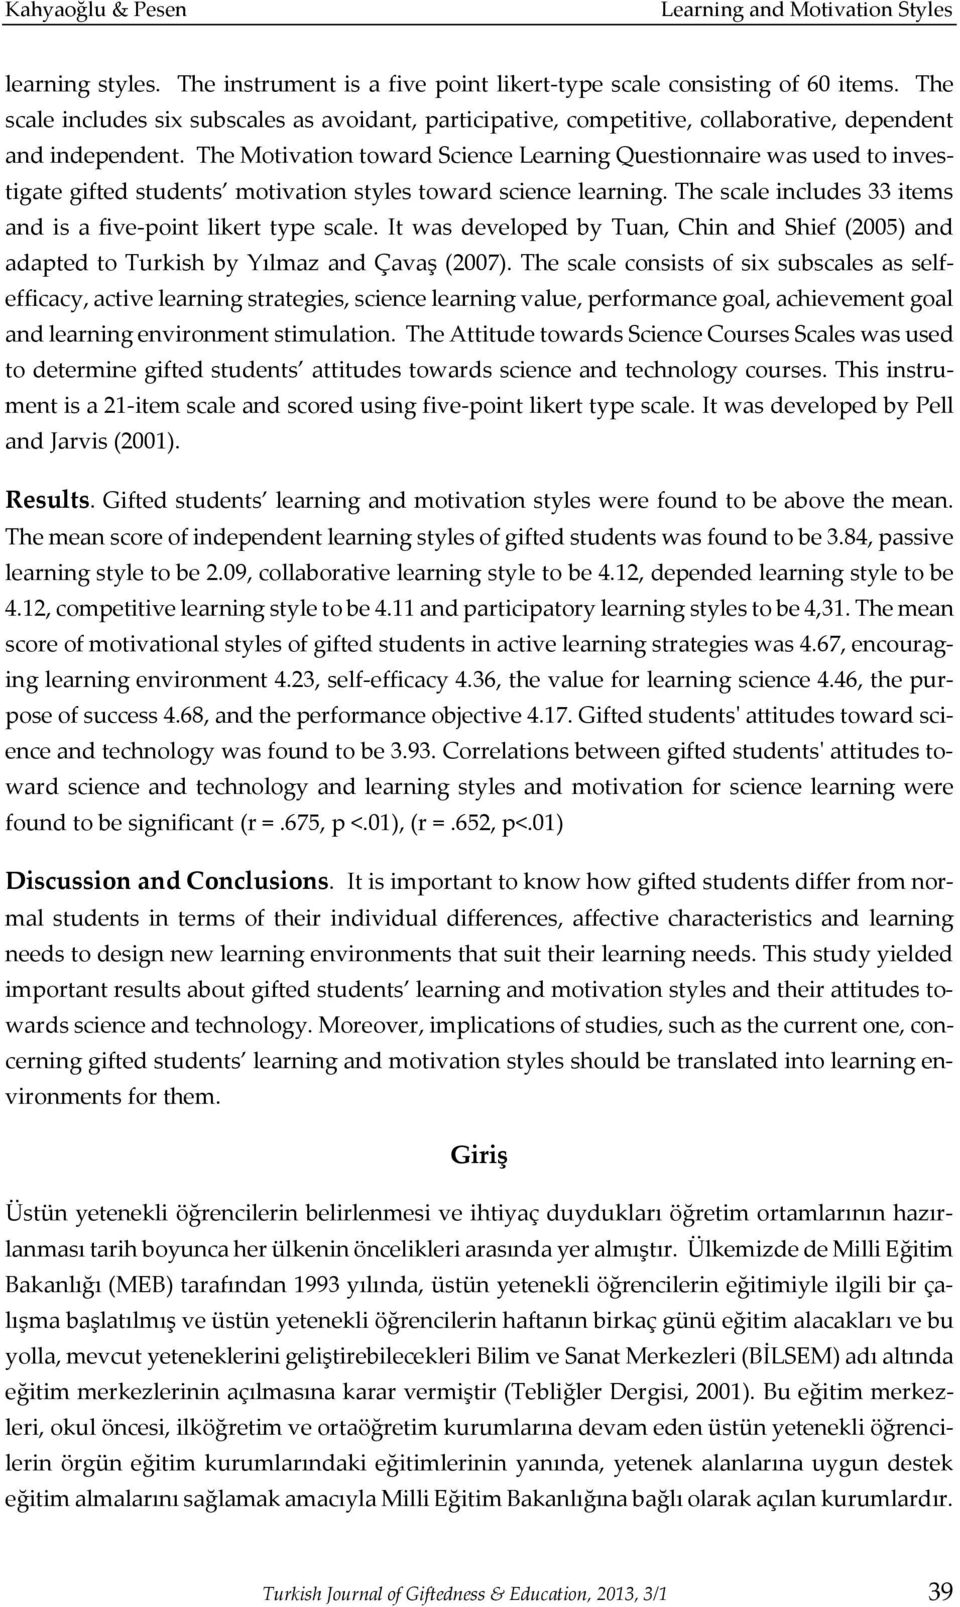 The Motivation toward Science Learning Questionnaire was used to investigate gifted students motivation styles toward science learning.